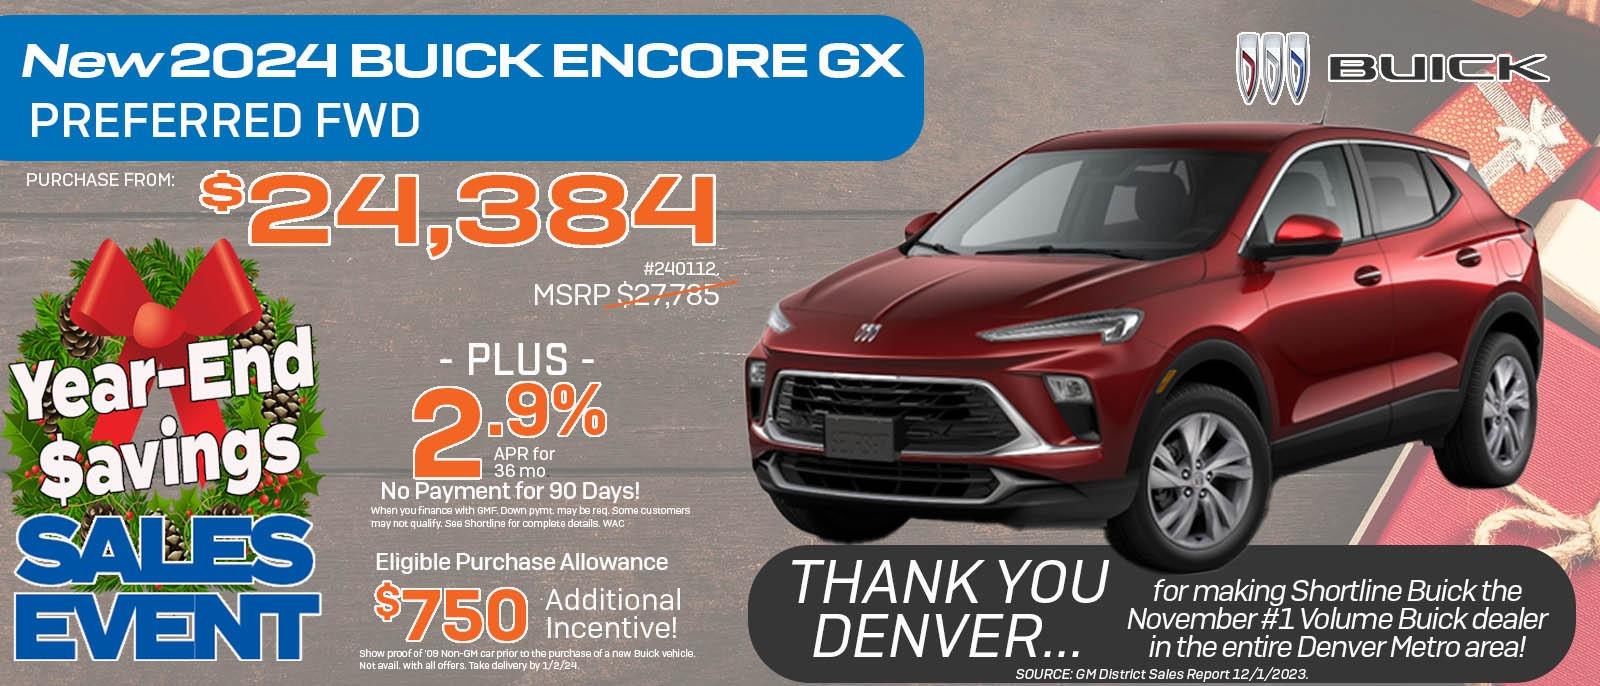 View Buick Encore GX Special in Denver at Shortline